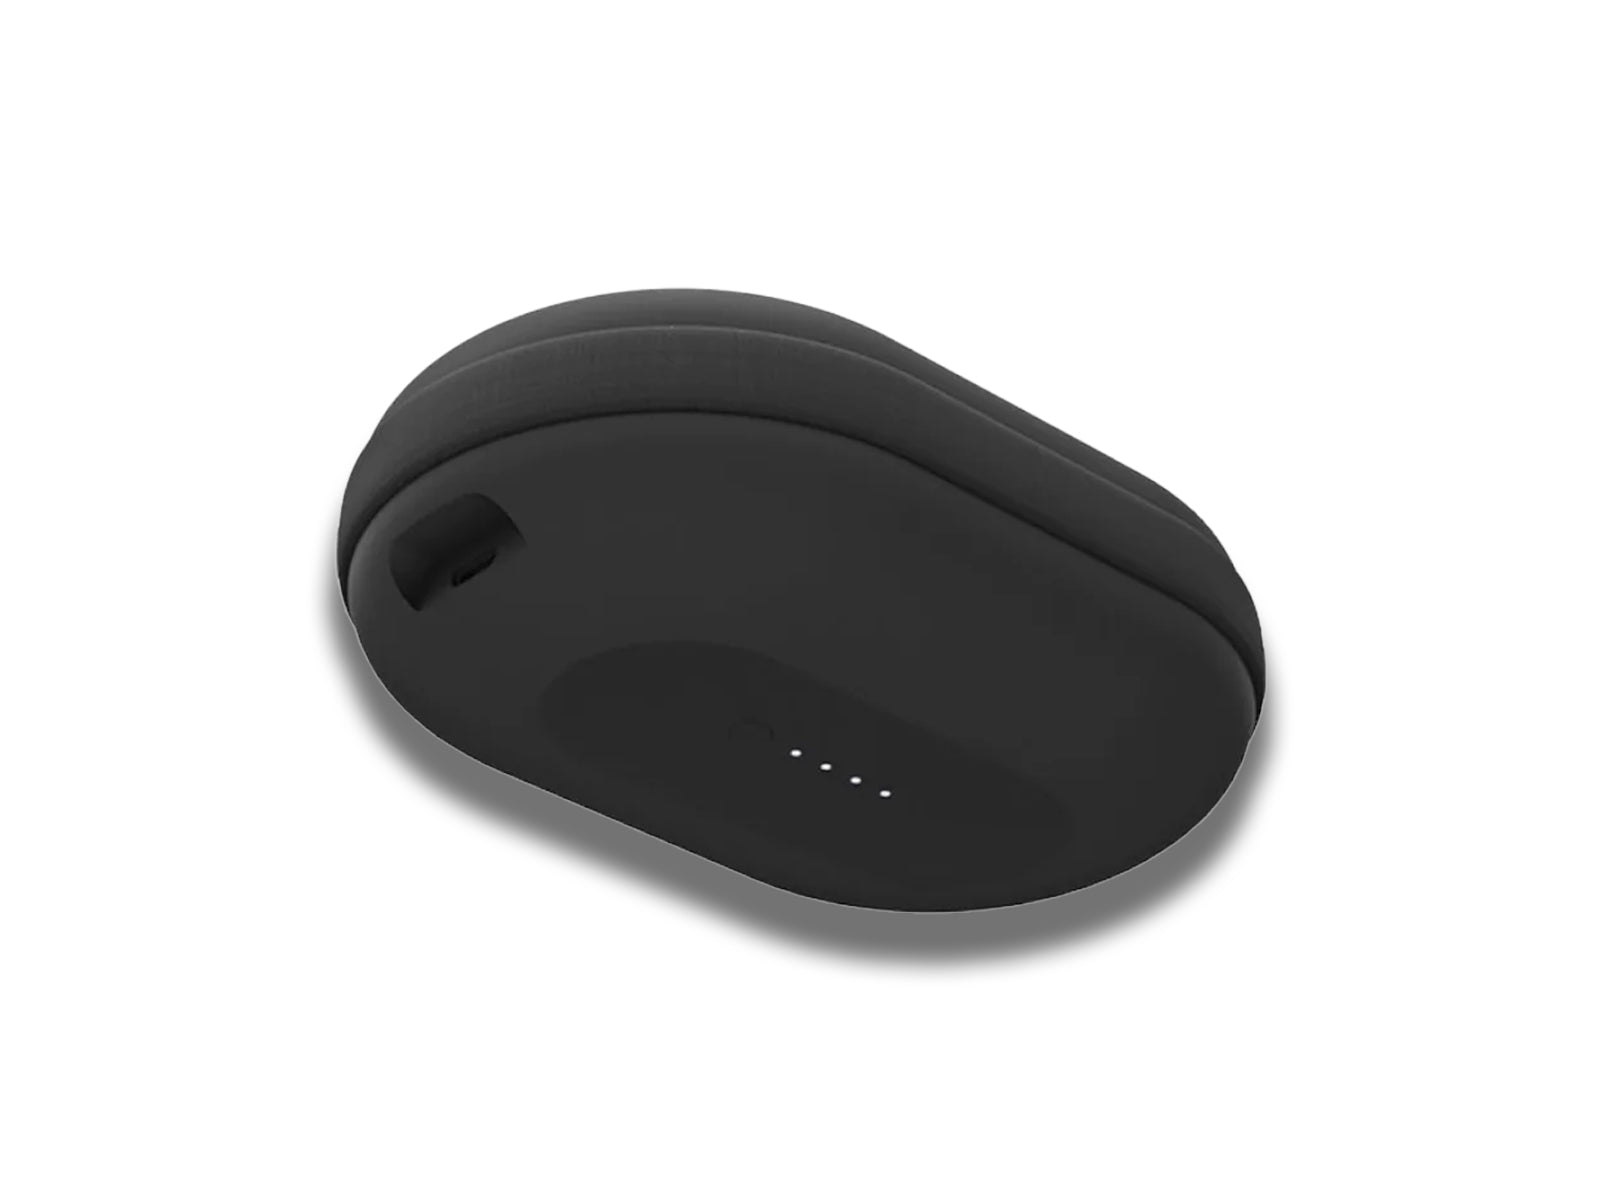 Image shows an angled bottom veiw of the Mophie Portable Power Capsule Charger For Wireless Headphones on a white background